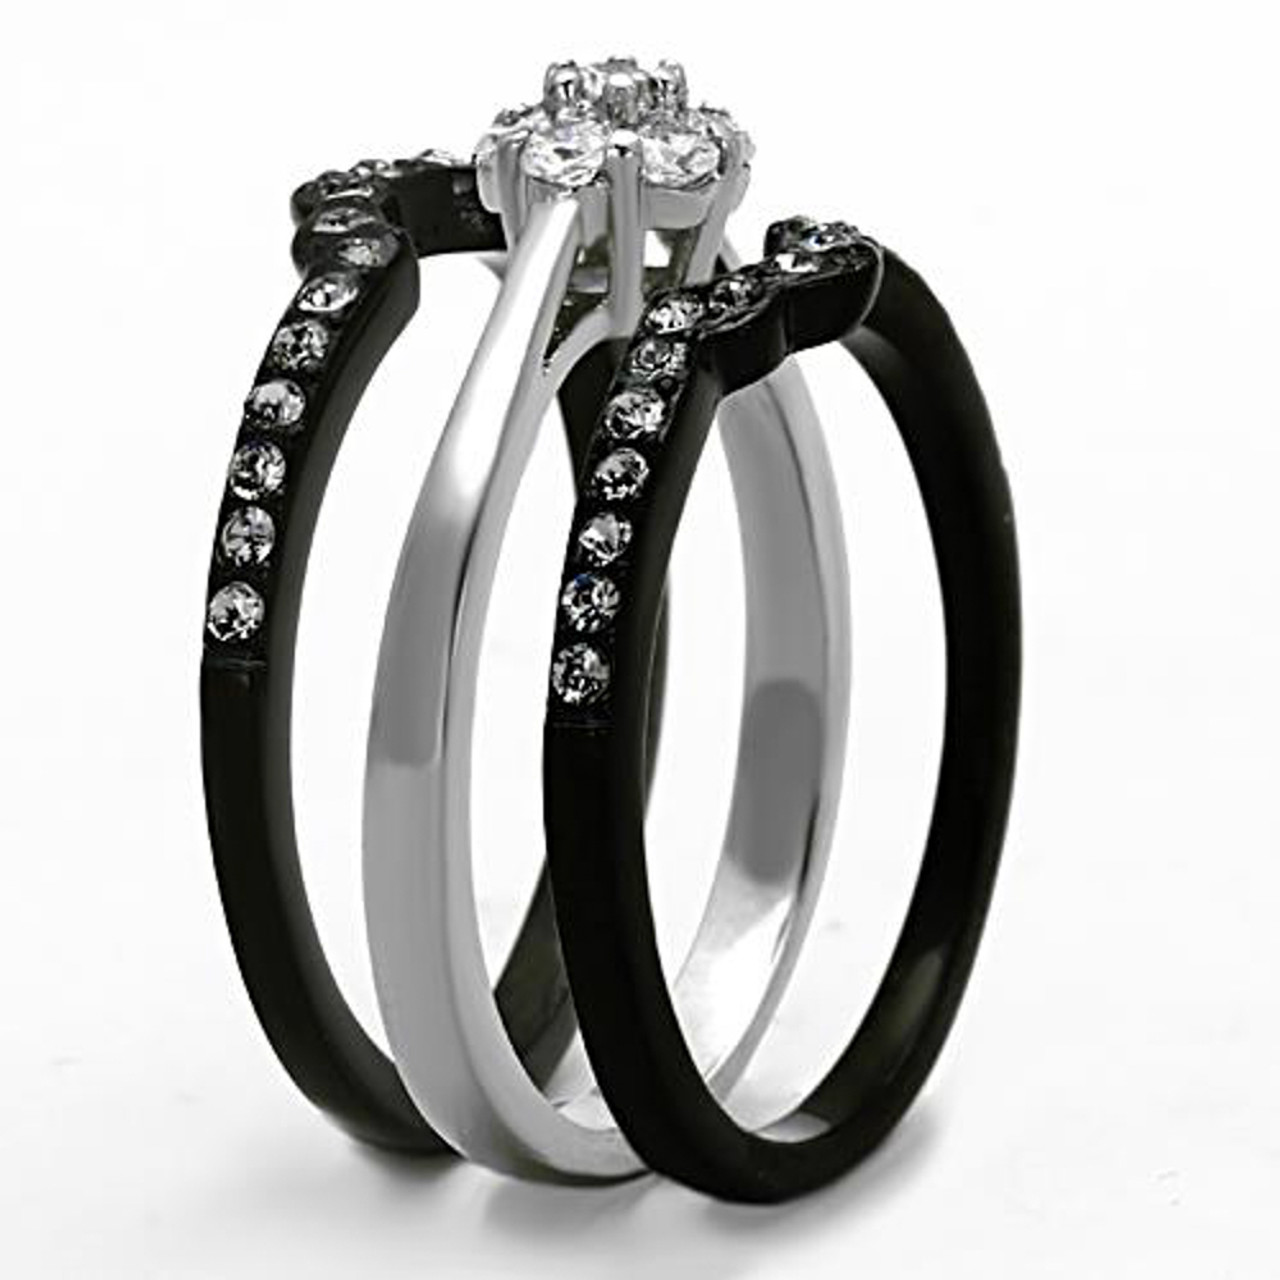 1.85 CT ROUND CUT CZ SILVER STAINLESS STEEL WEDDING RING SET WOMEN/'S SIZE 5-10